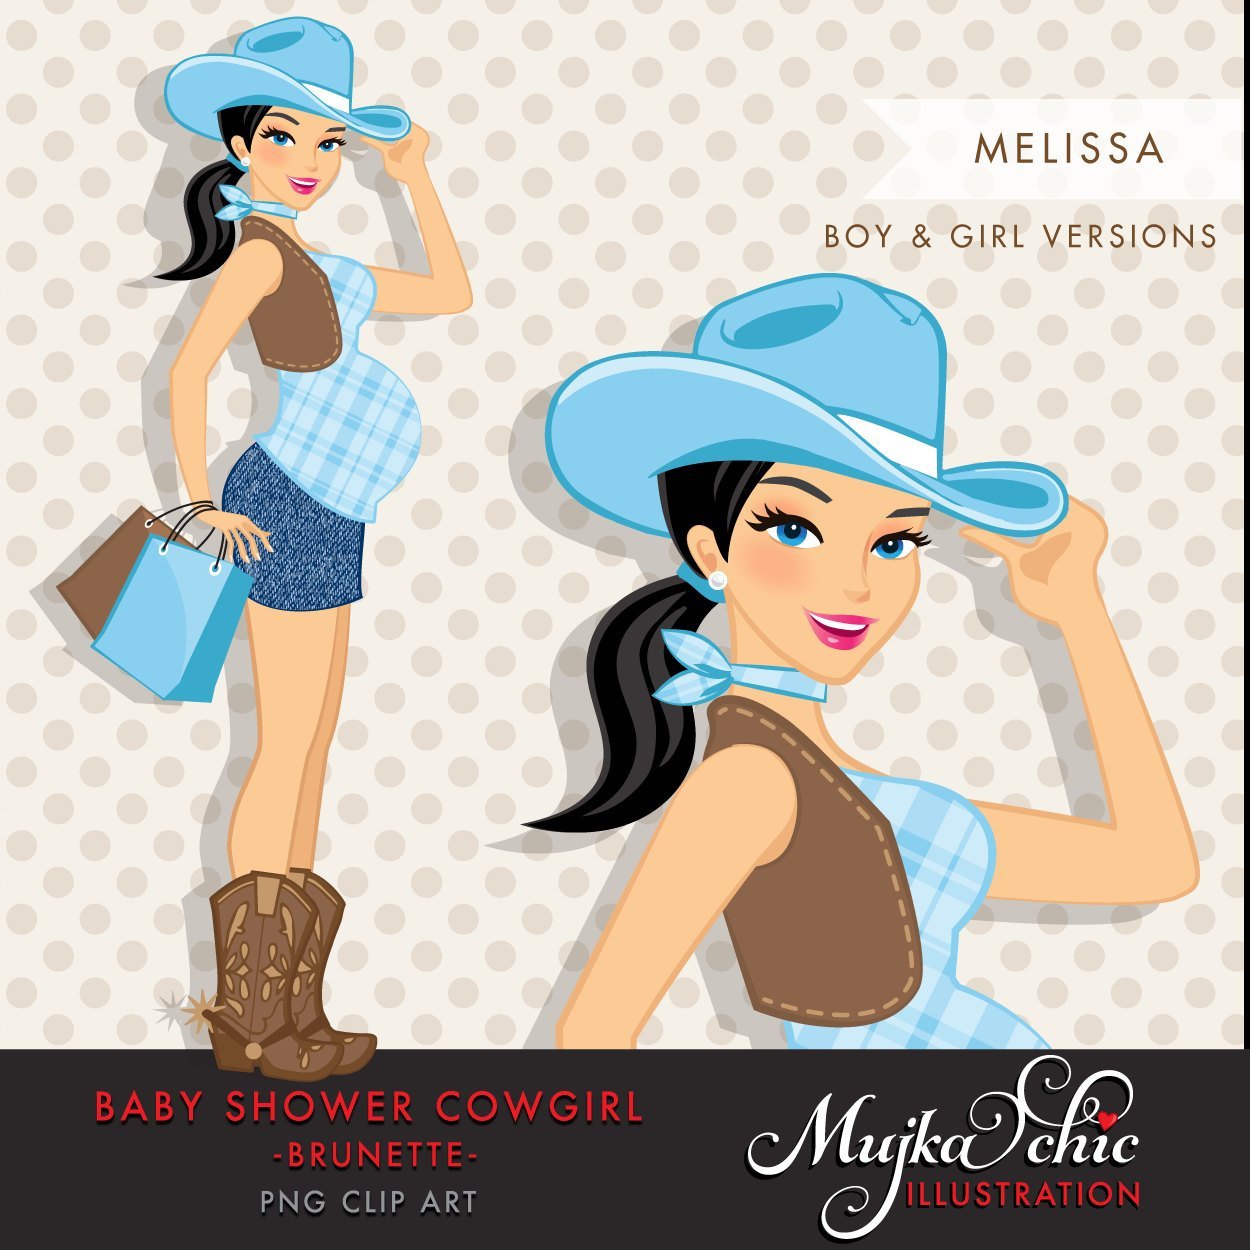 Brunette Cowgirl Pregnant Woman Character carrying gift bags Clipart. Baby Shower Party Invitation Character